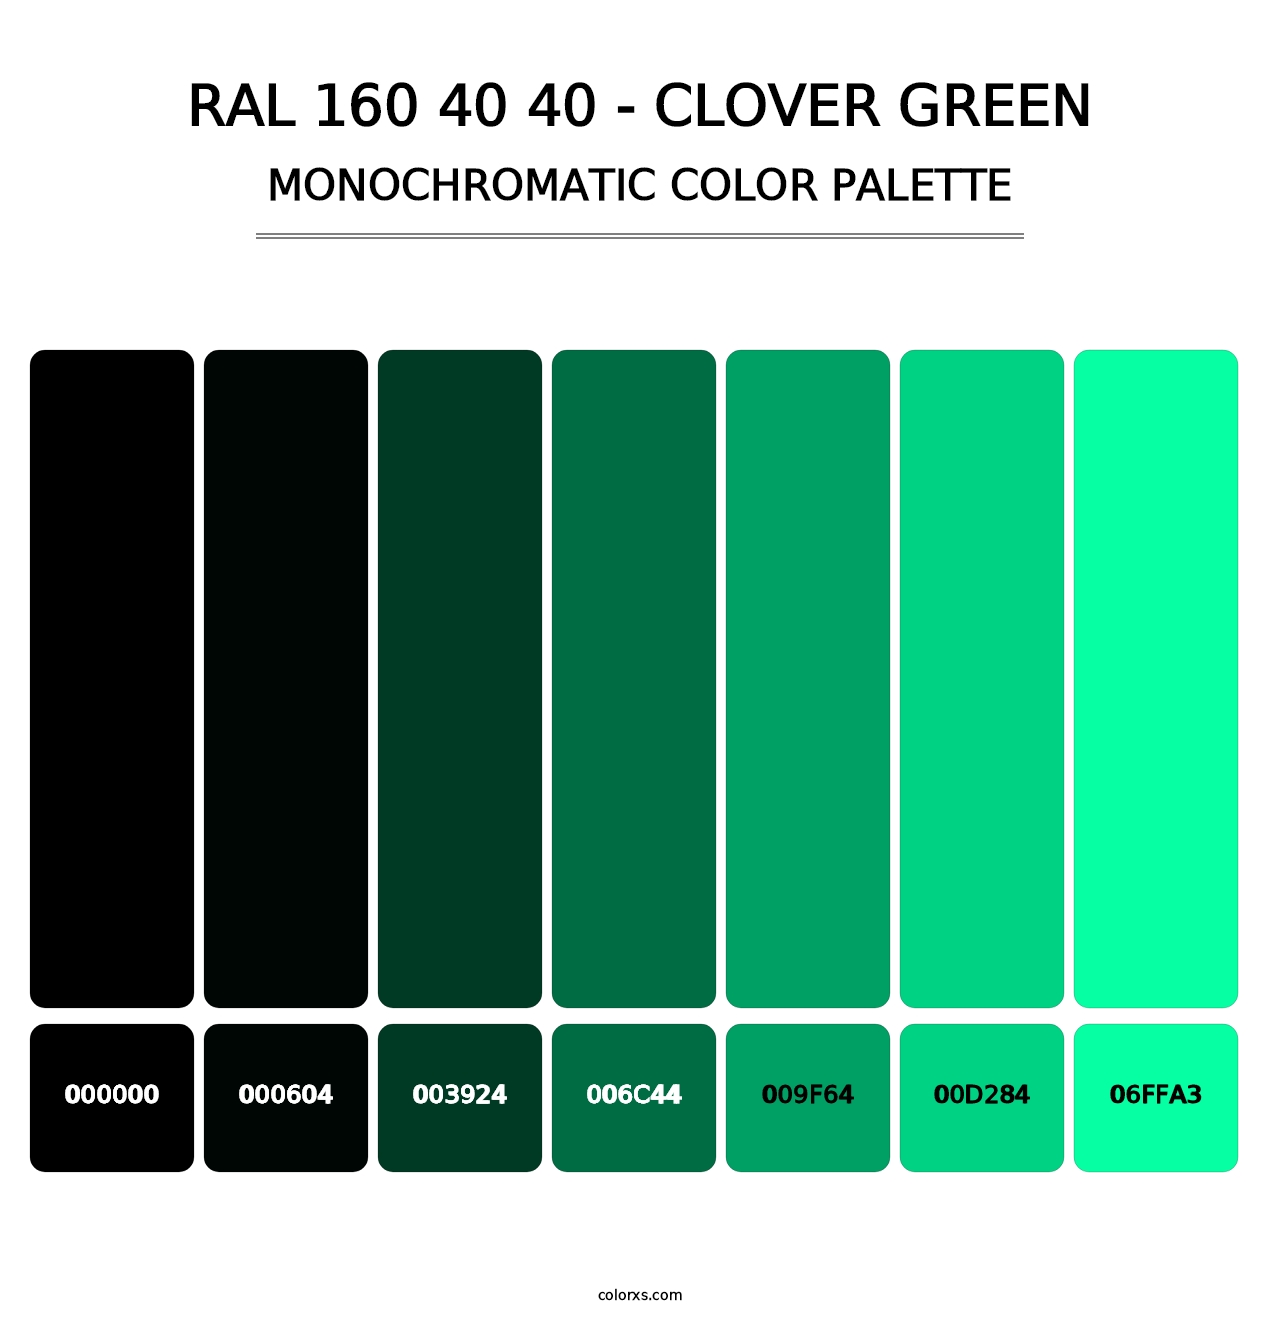 RAL 160 40 40 - Clover Green - Monochromatic Color Palette